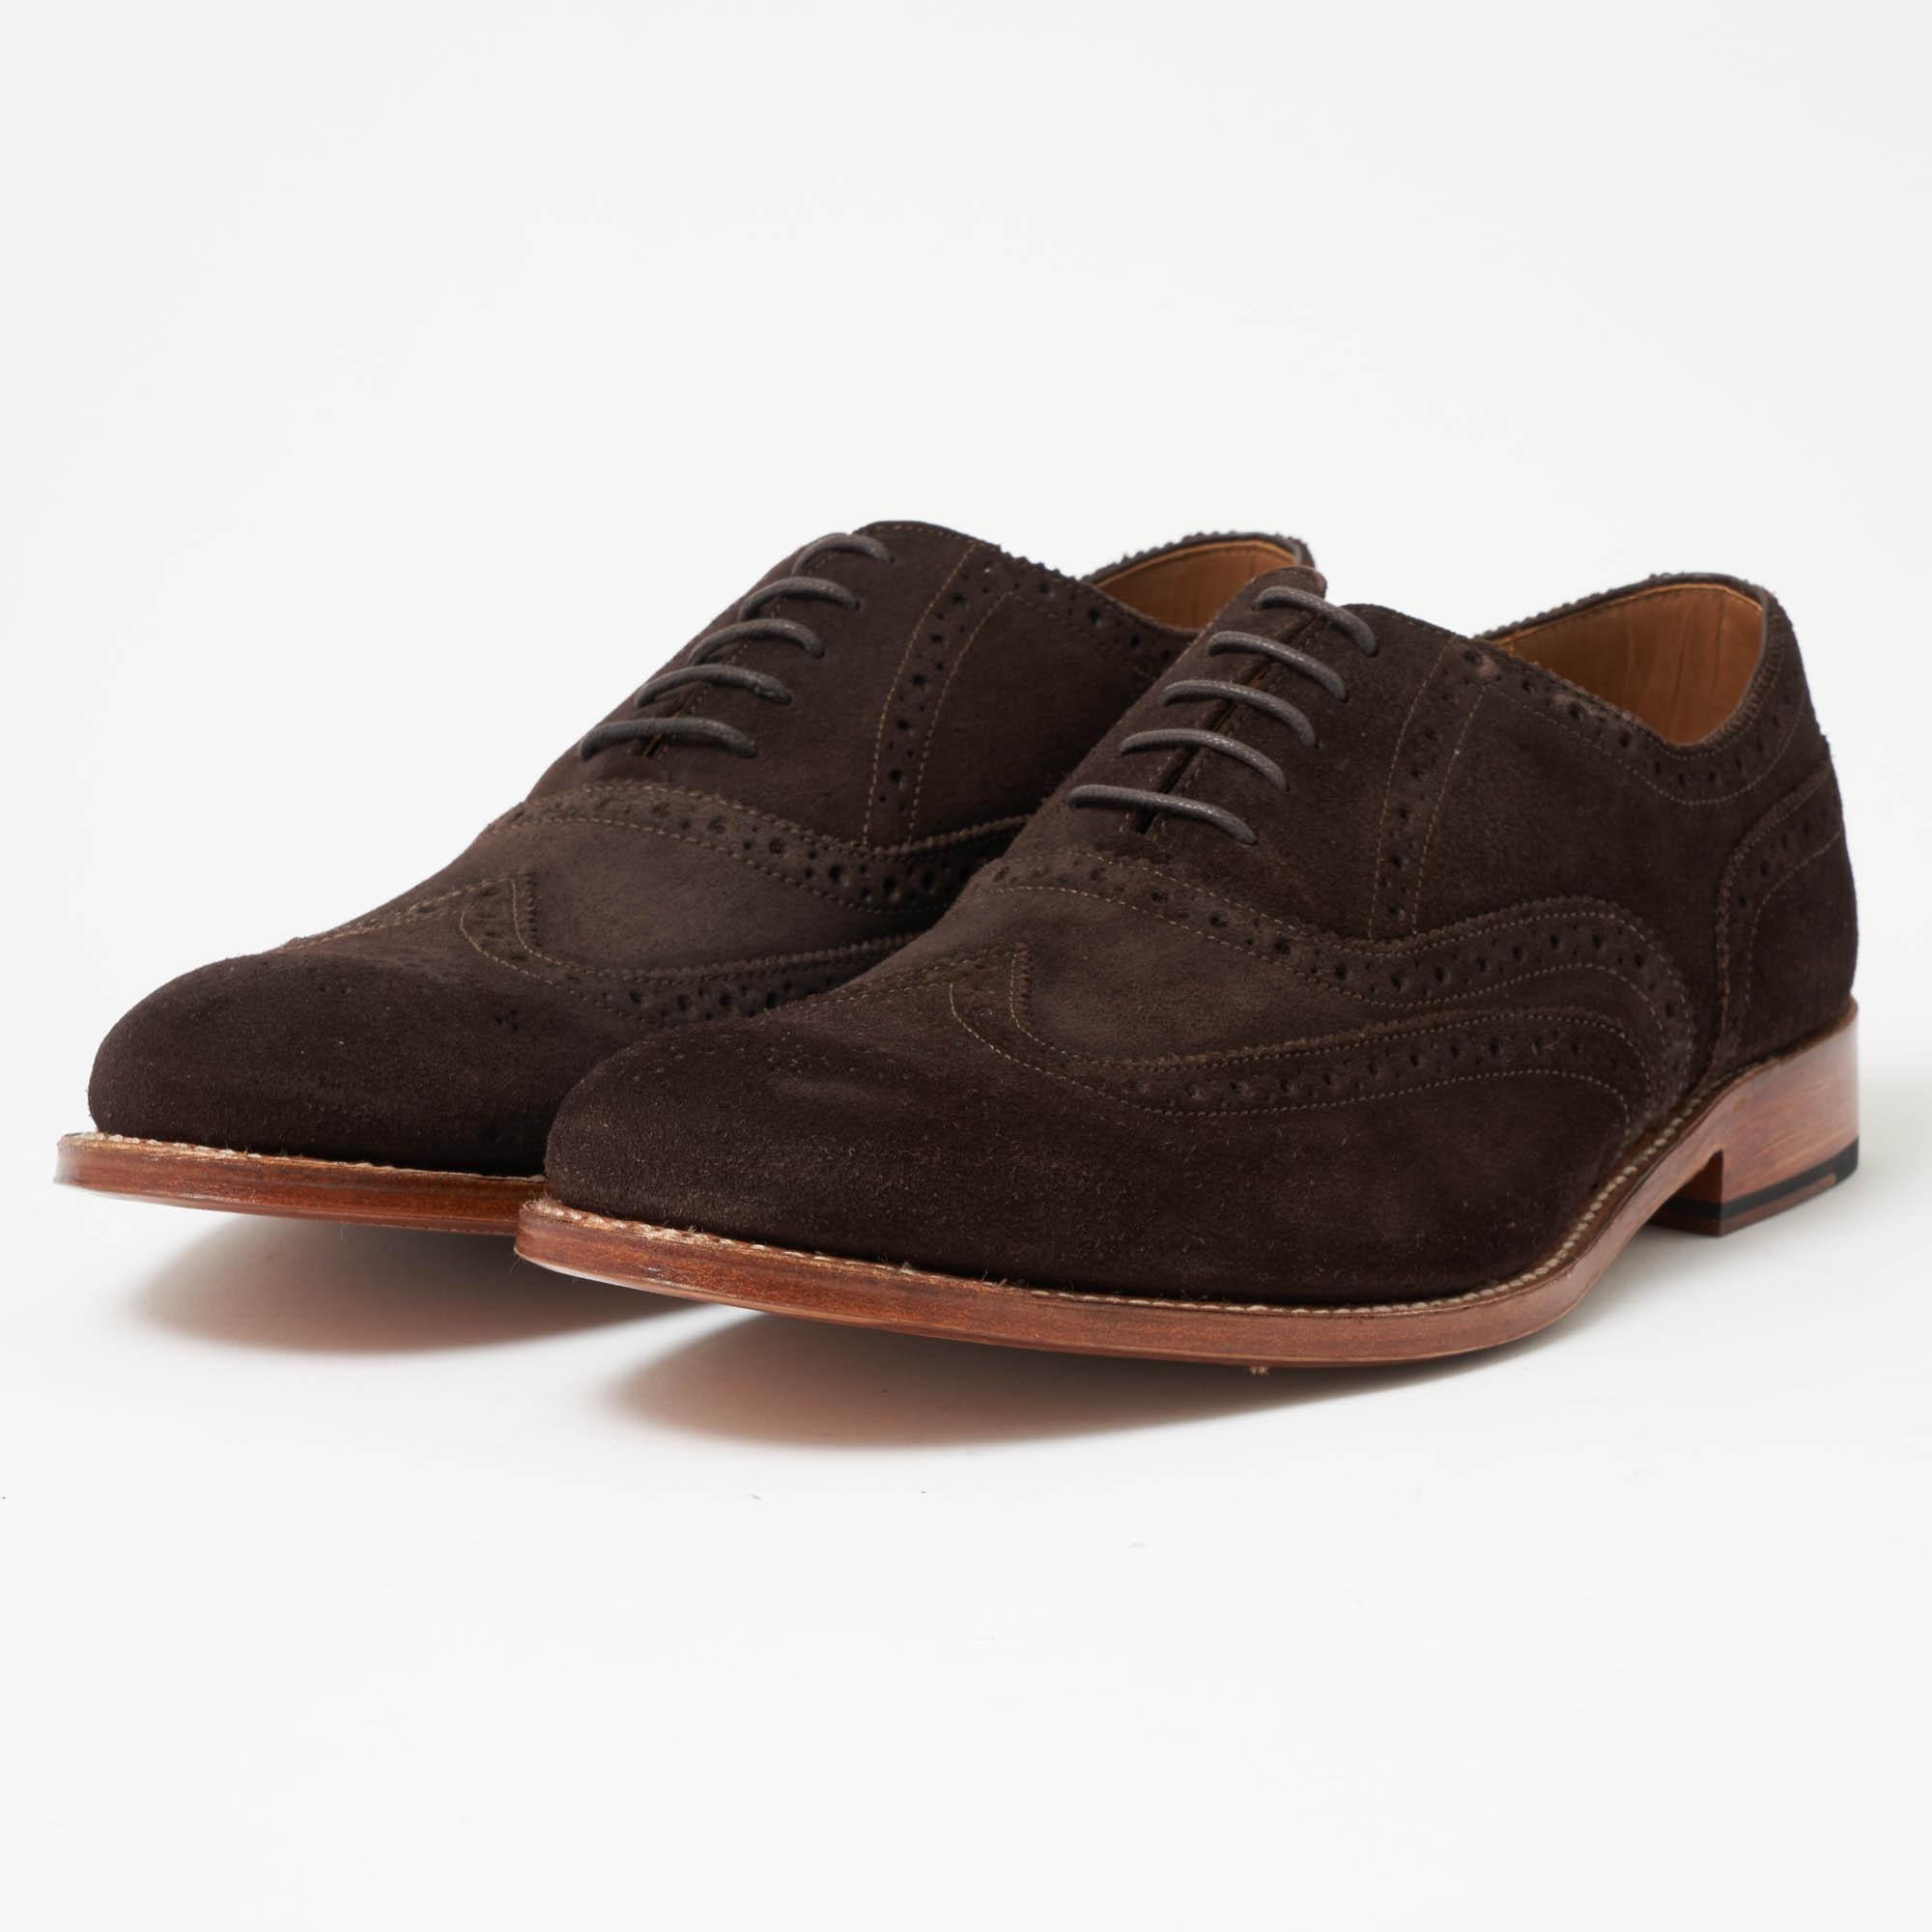 Lyst - Grenson Dylan Chocolate Suede Brogue Shoes for Men - Save 37%